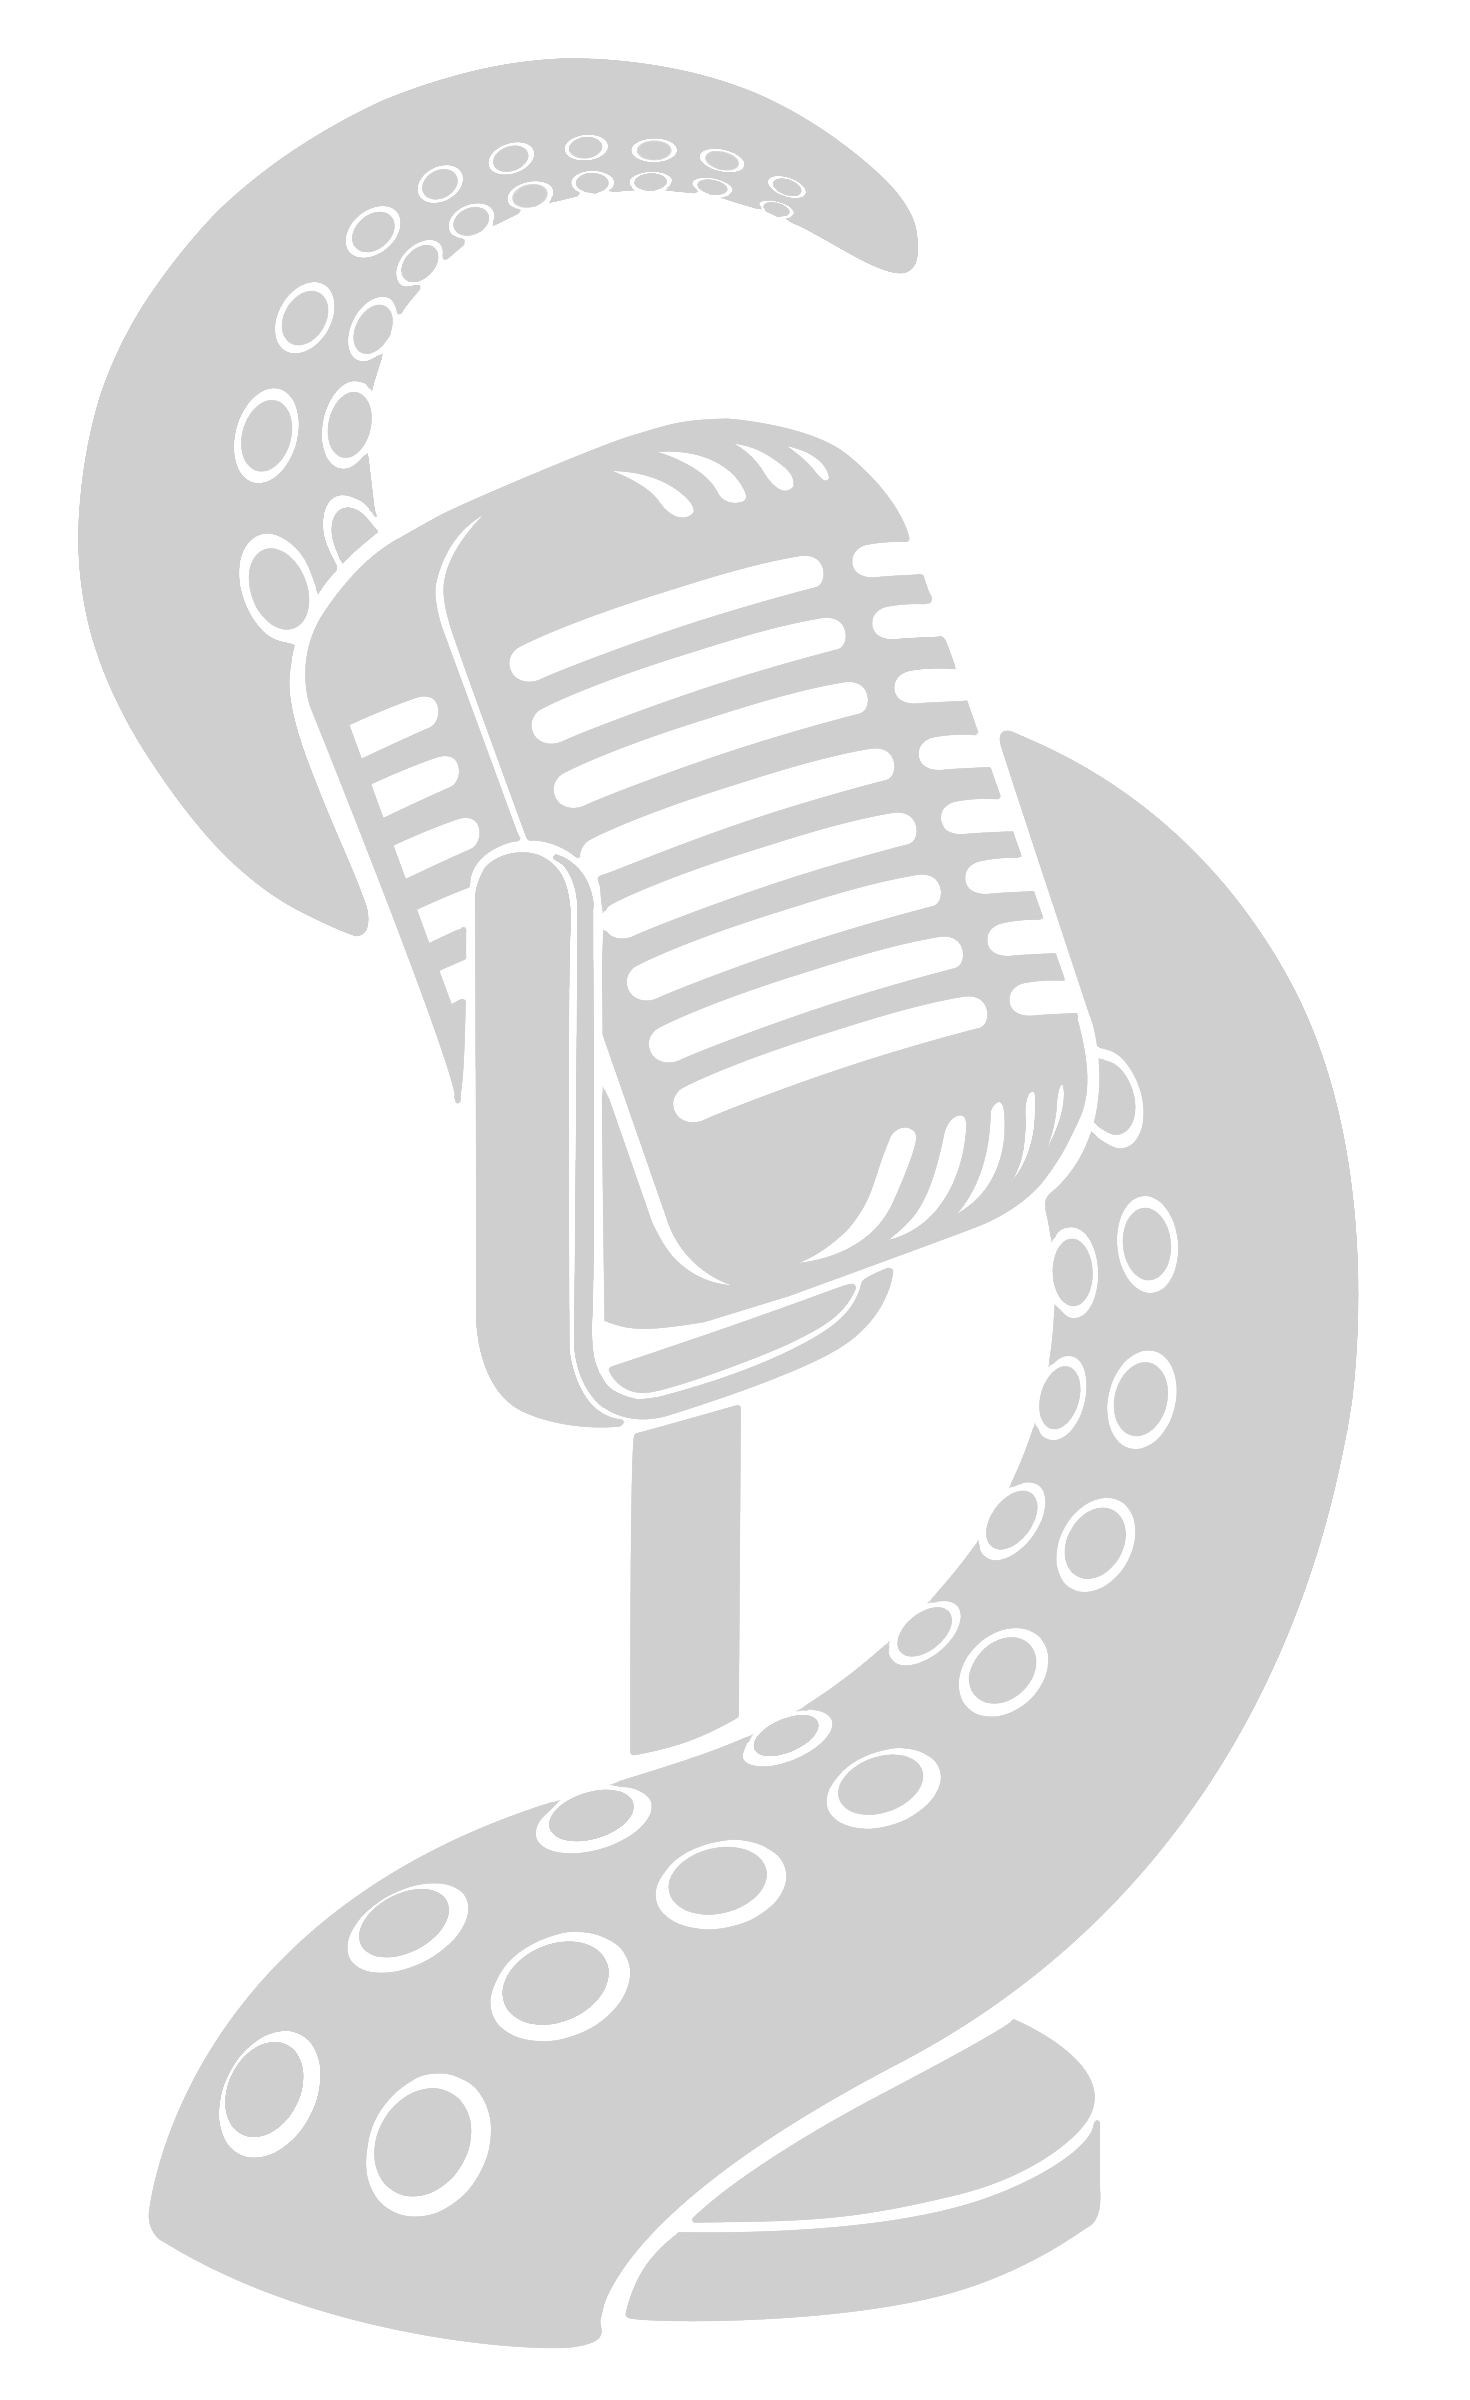 The tentacle-and-mic logo of Black Market Voices, by Flamia